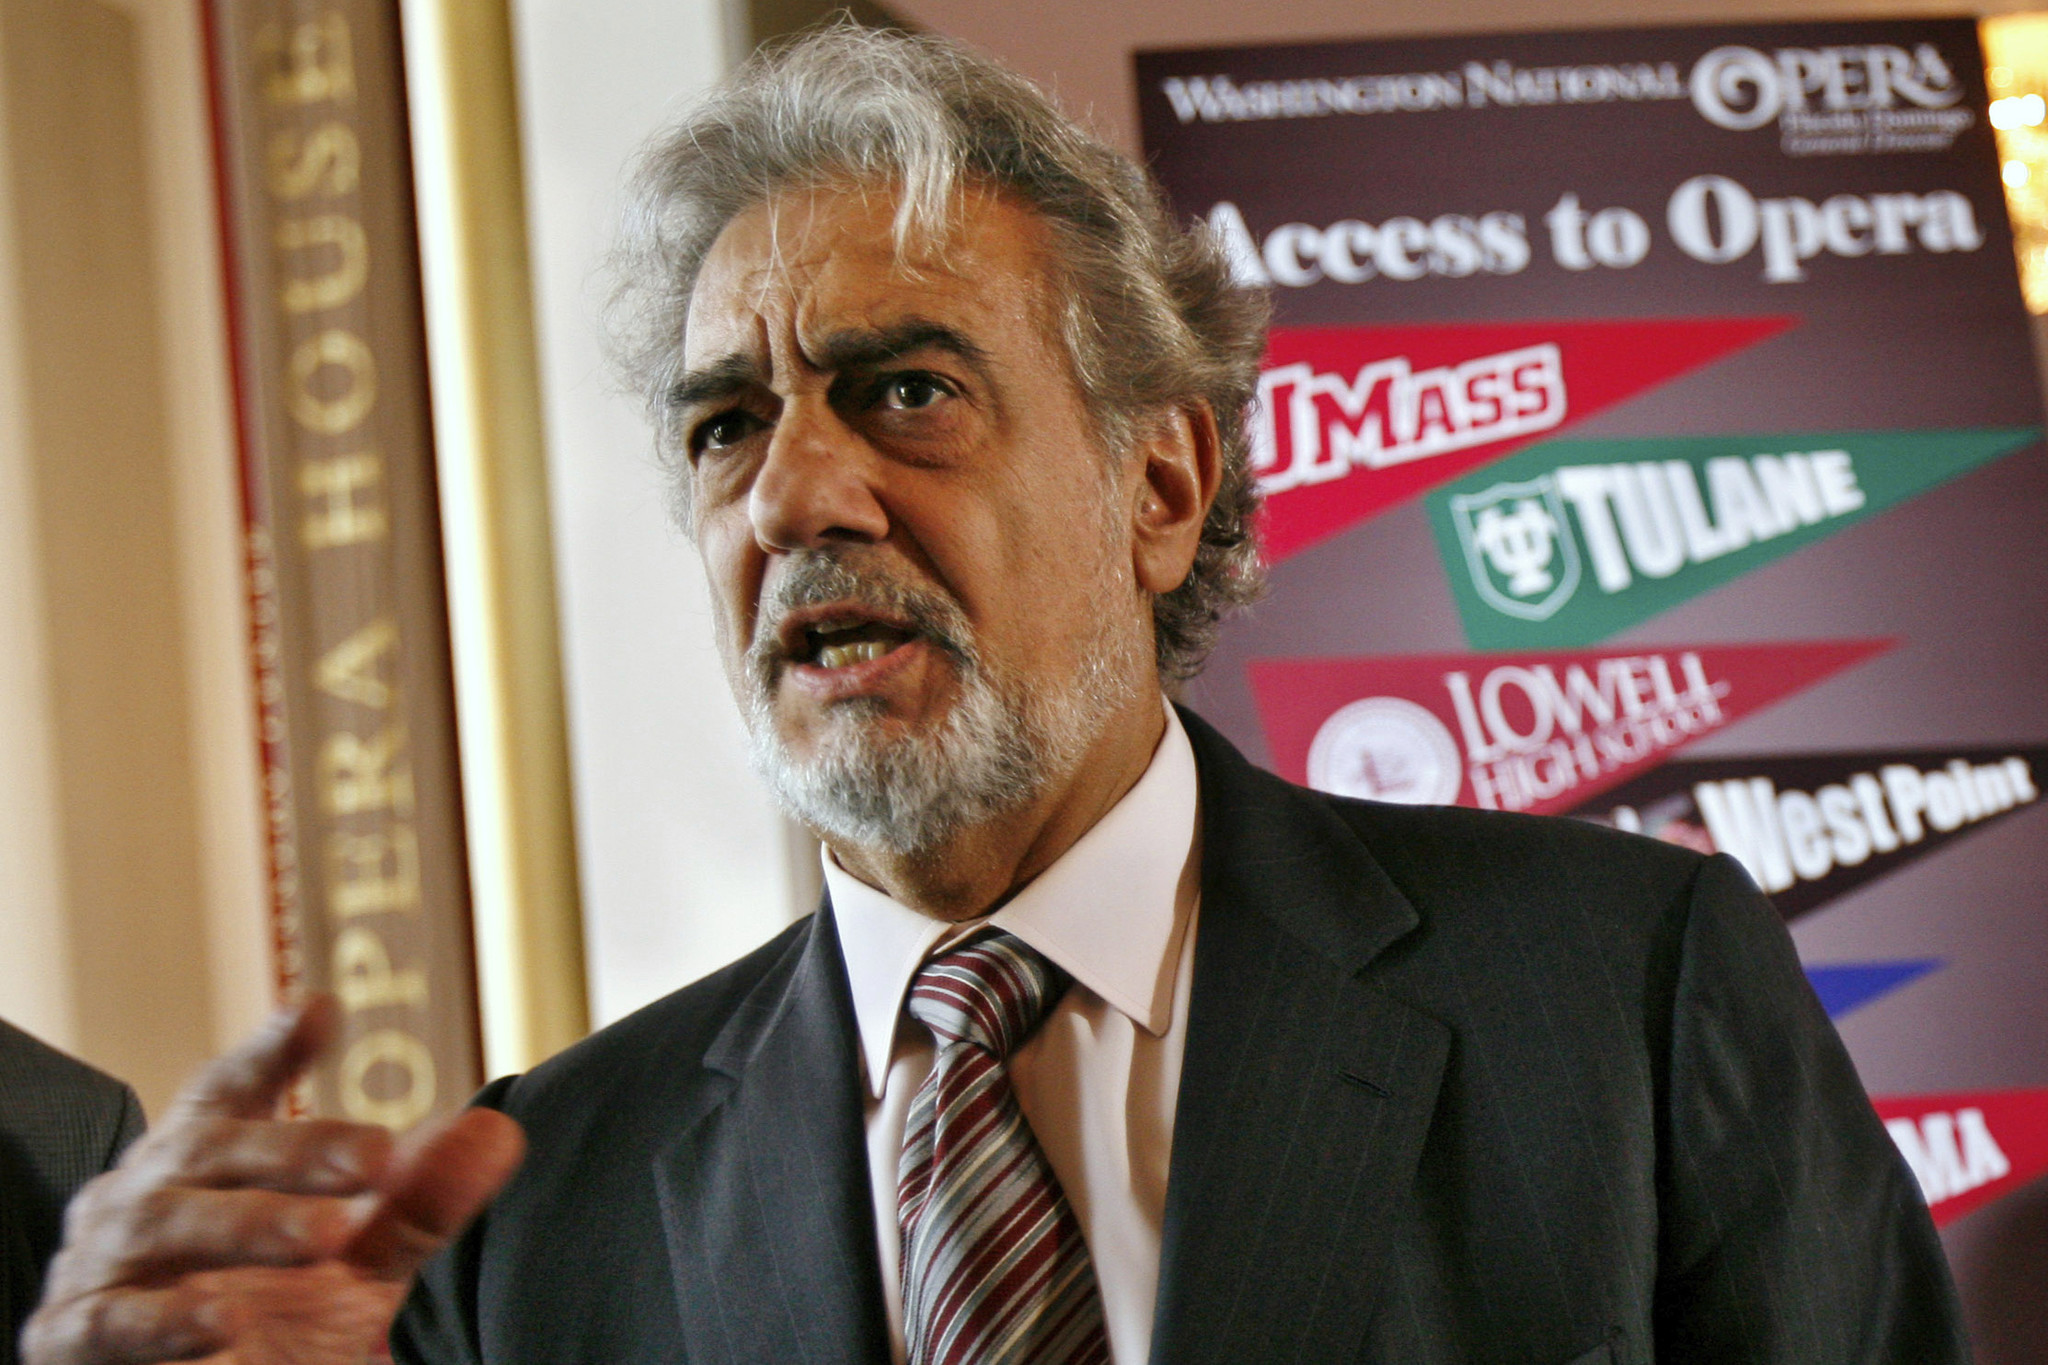 Plácido Domingo again denies sexual harassment allegations, says apology gave ‘false impression’